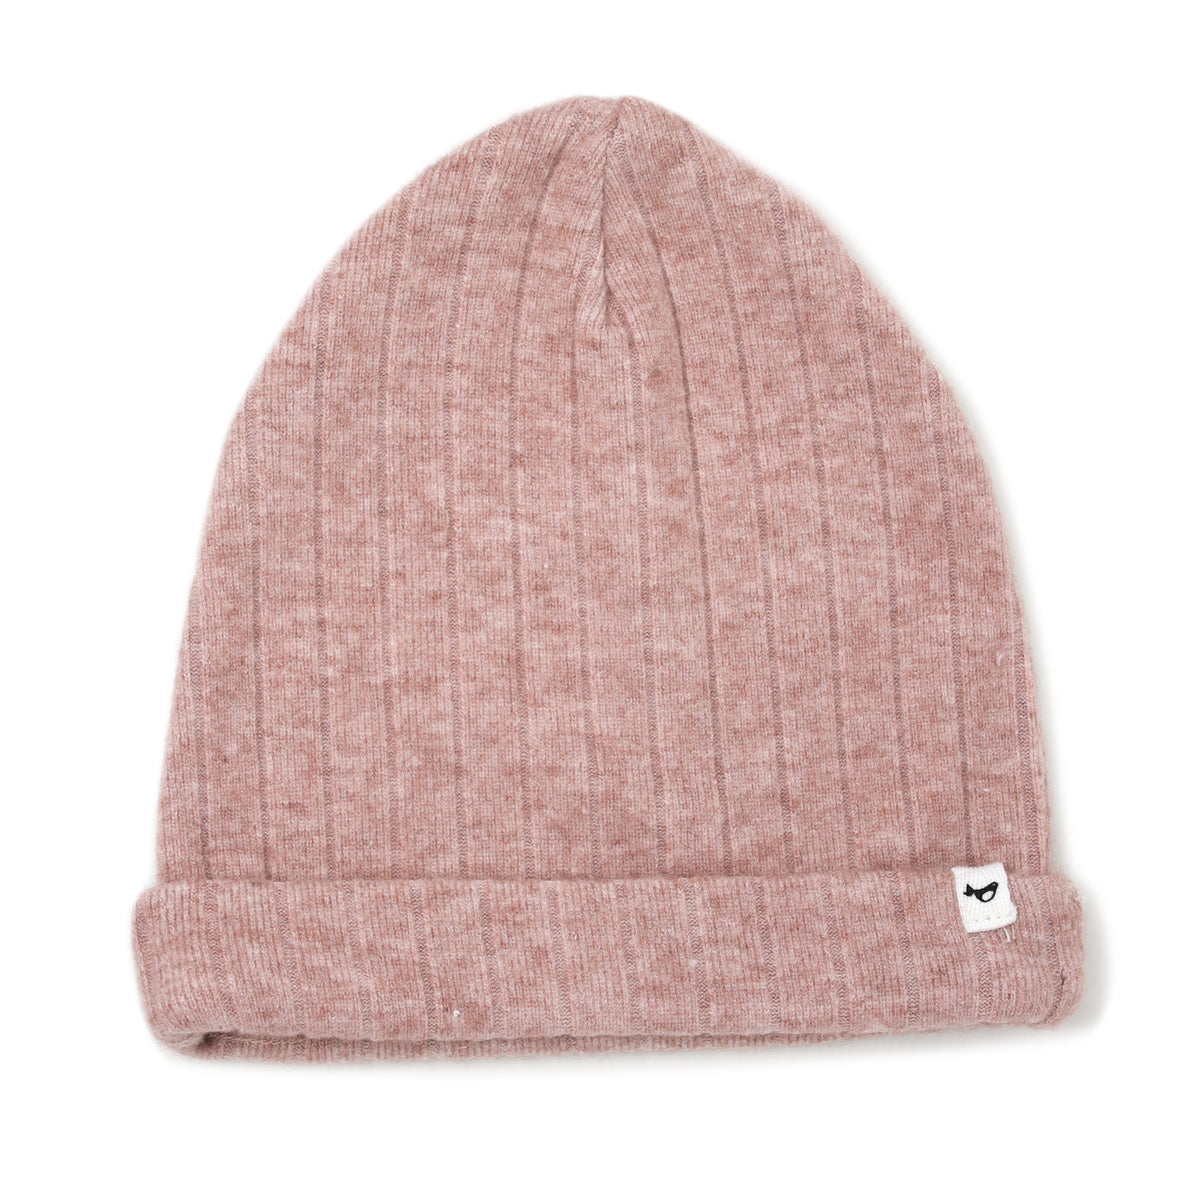 oh baby! Wide Rib Sweater Knit Watchcap - Blush Heather